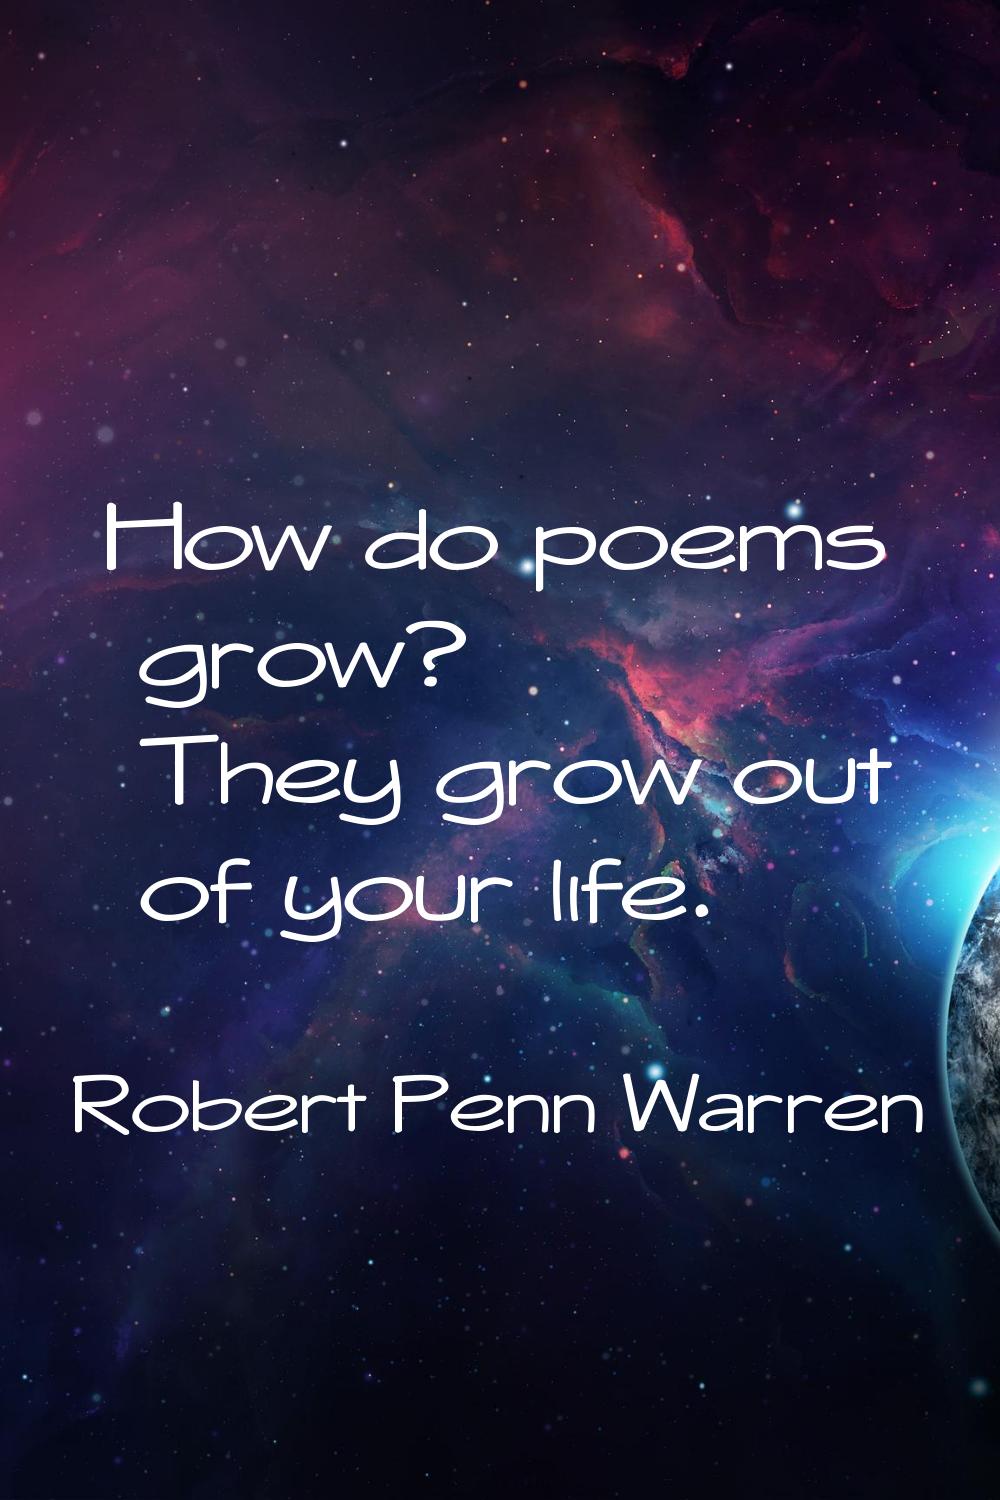 How do poems grow? They grow out of your life.